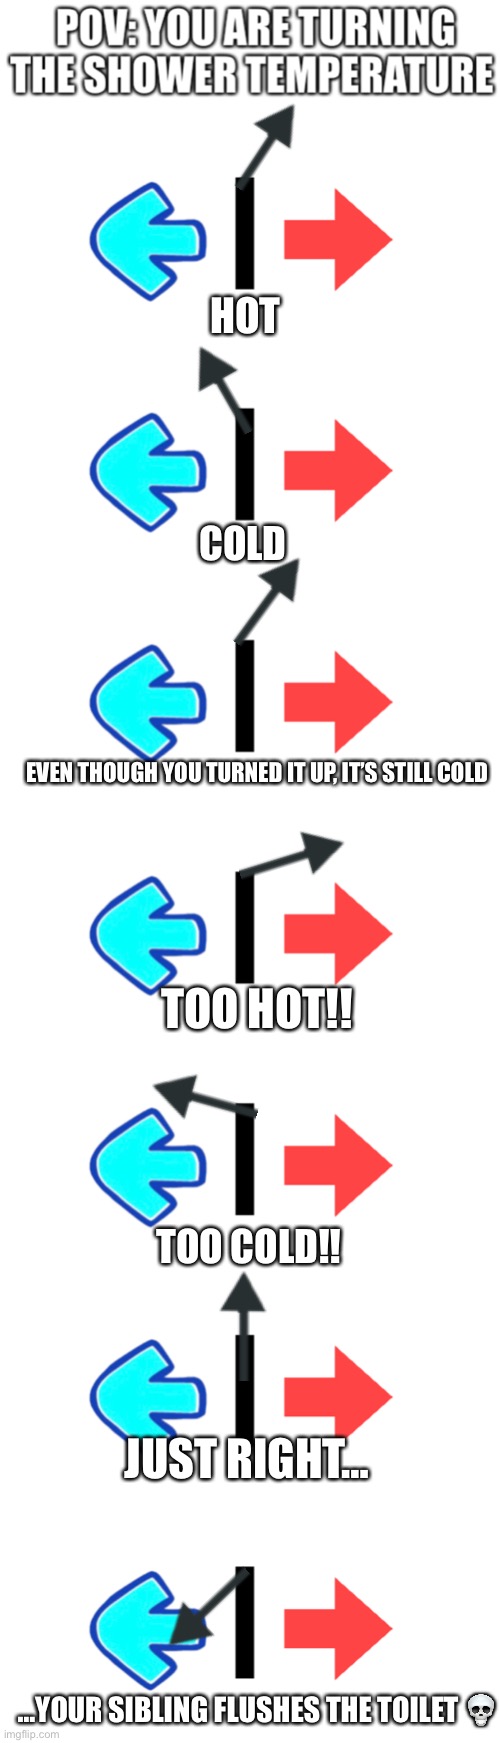 Shower temperature | HOT; COLD; EVEN THOUGH YOU TURNED IT UP, IT’S STILL COLD; TOO HOT!! TOO COLD!! JUST RIGHT…; …YOUR SIBLING FLUSHES THE TOILET 💀 | image tagged in too hot,too cold,just right | made w/ Imgflip meme maker